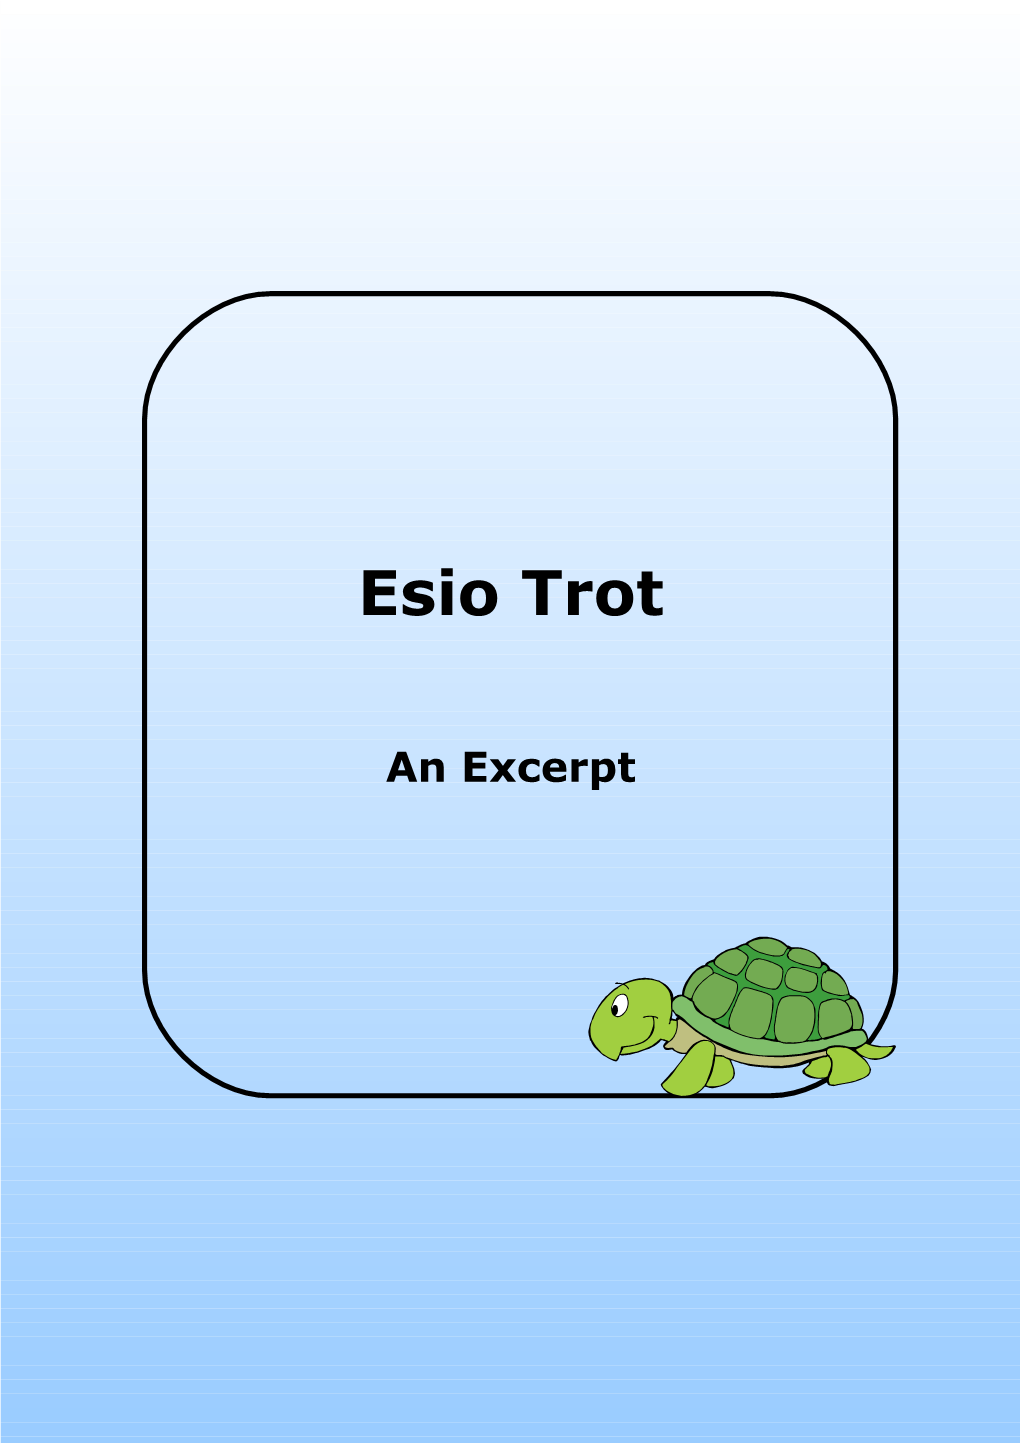 In This Extract, Mr Hoppy Teaches Mrs Silver How to Make Her Tortoise Alfie Grow Faster